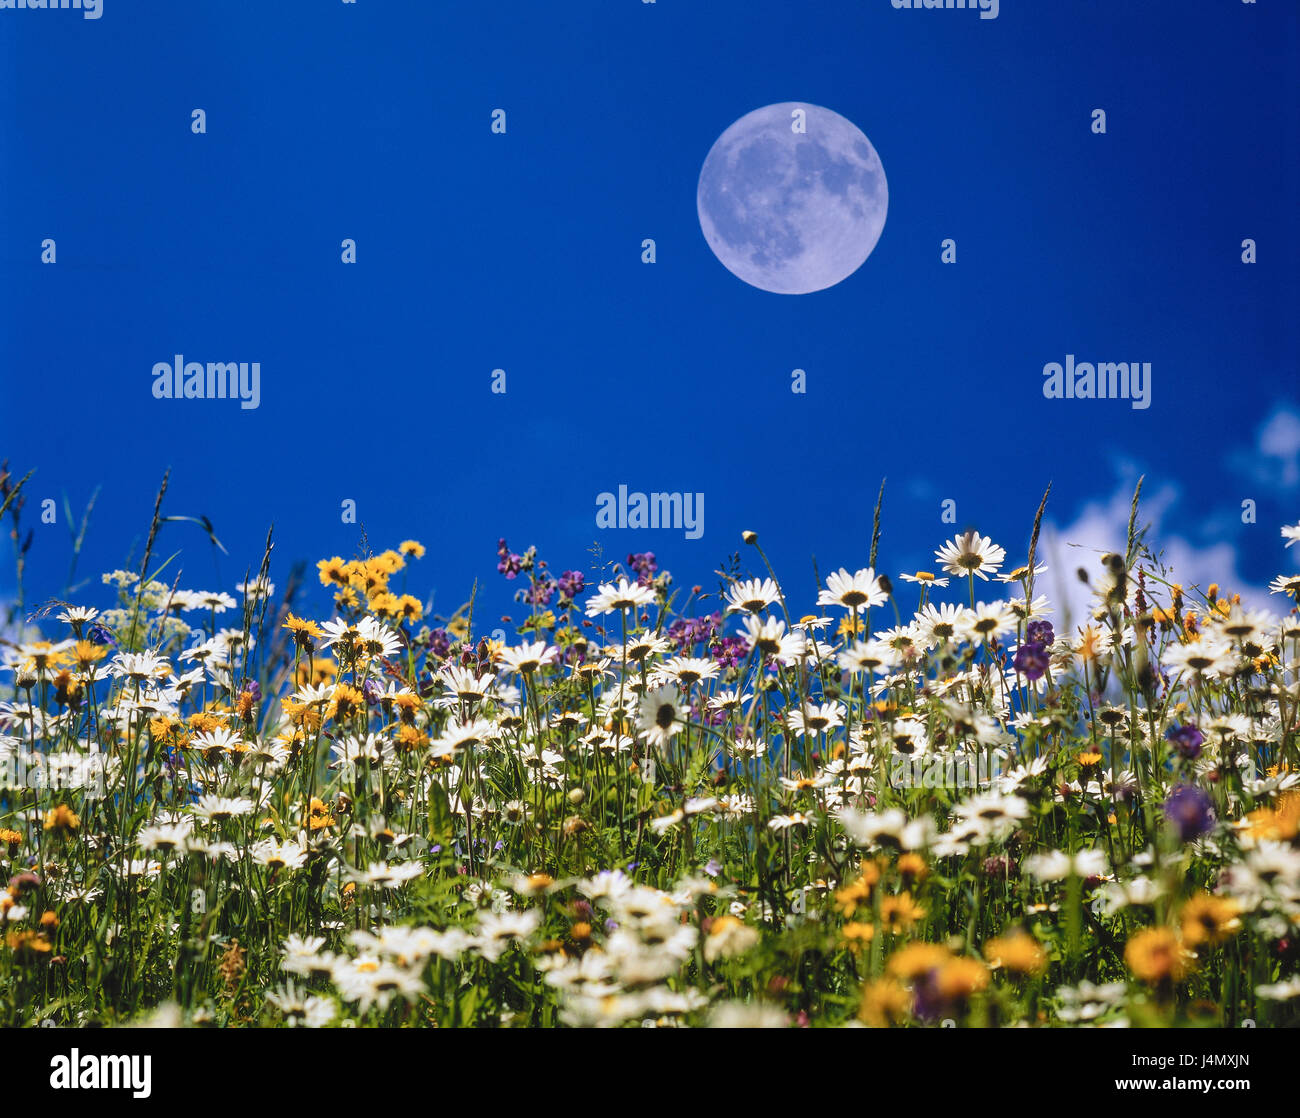 Flower meadow, sky, full moon meadow, margin rites, summer meadow, margin rite meadow, flowers, white, yellow, summer, summer flowers, mountain pasture, nature, natural light, tag, time of day, moon, planet, unusually, phase of the moon, season, sunshine, blue, [M] Stock Photo